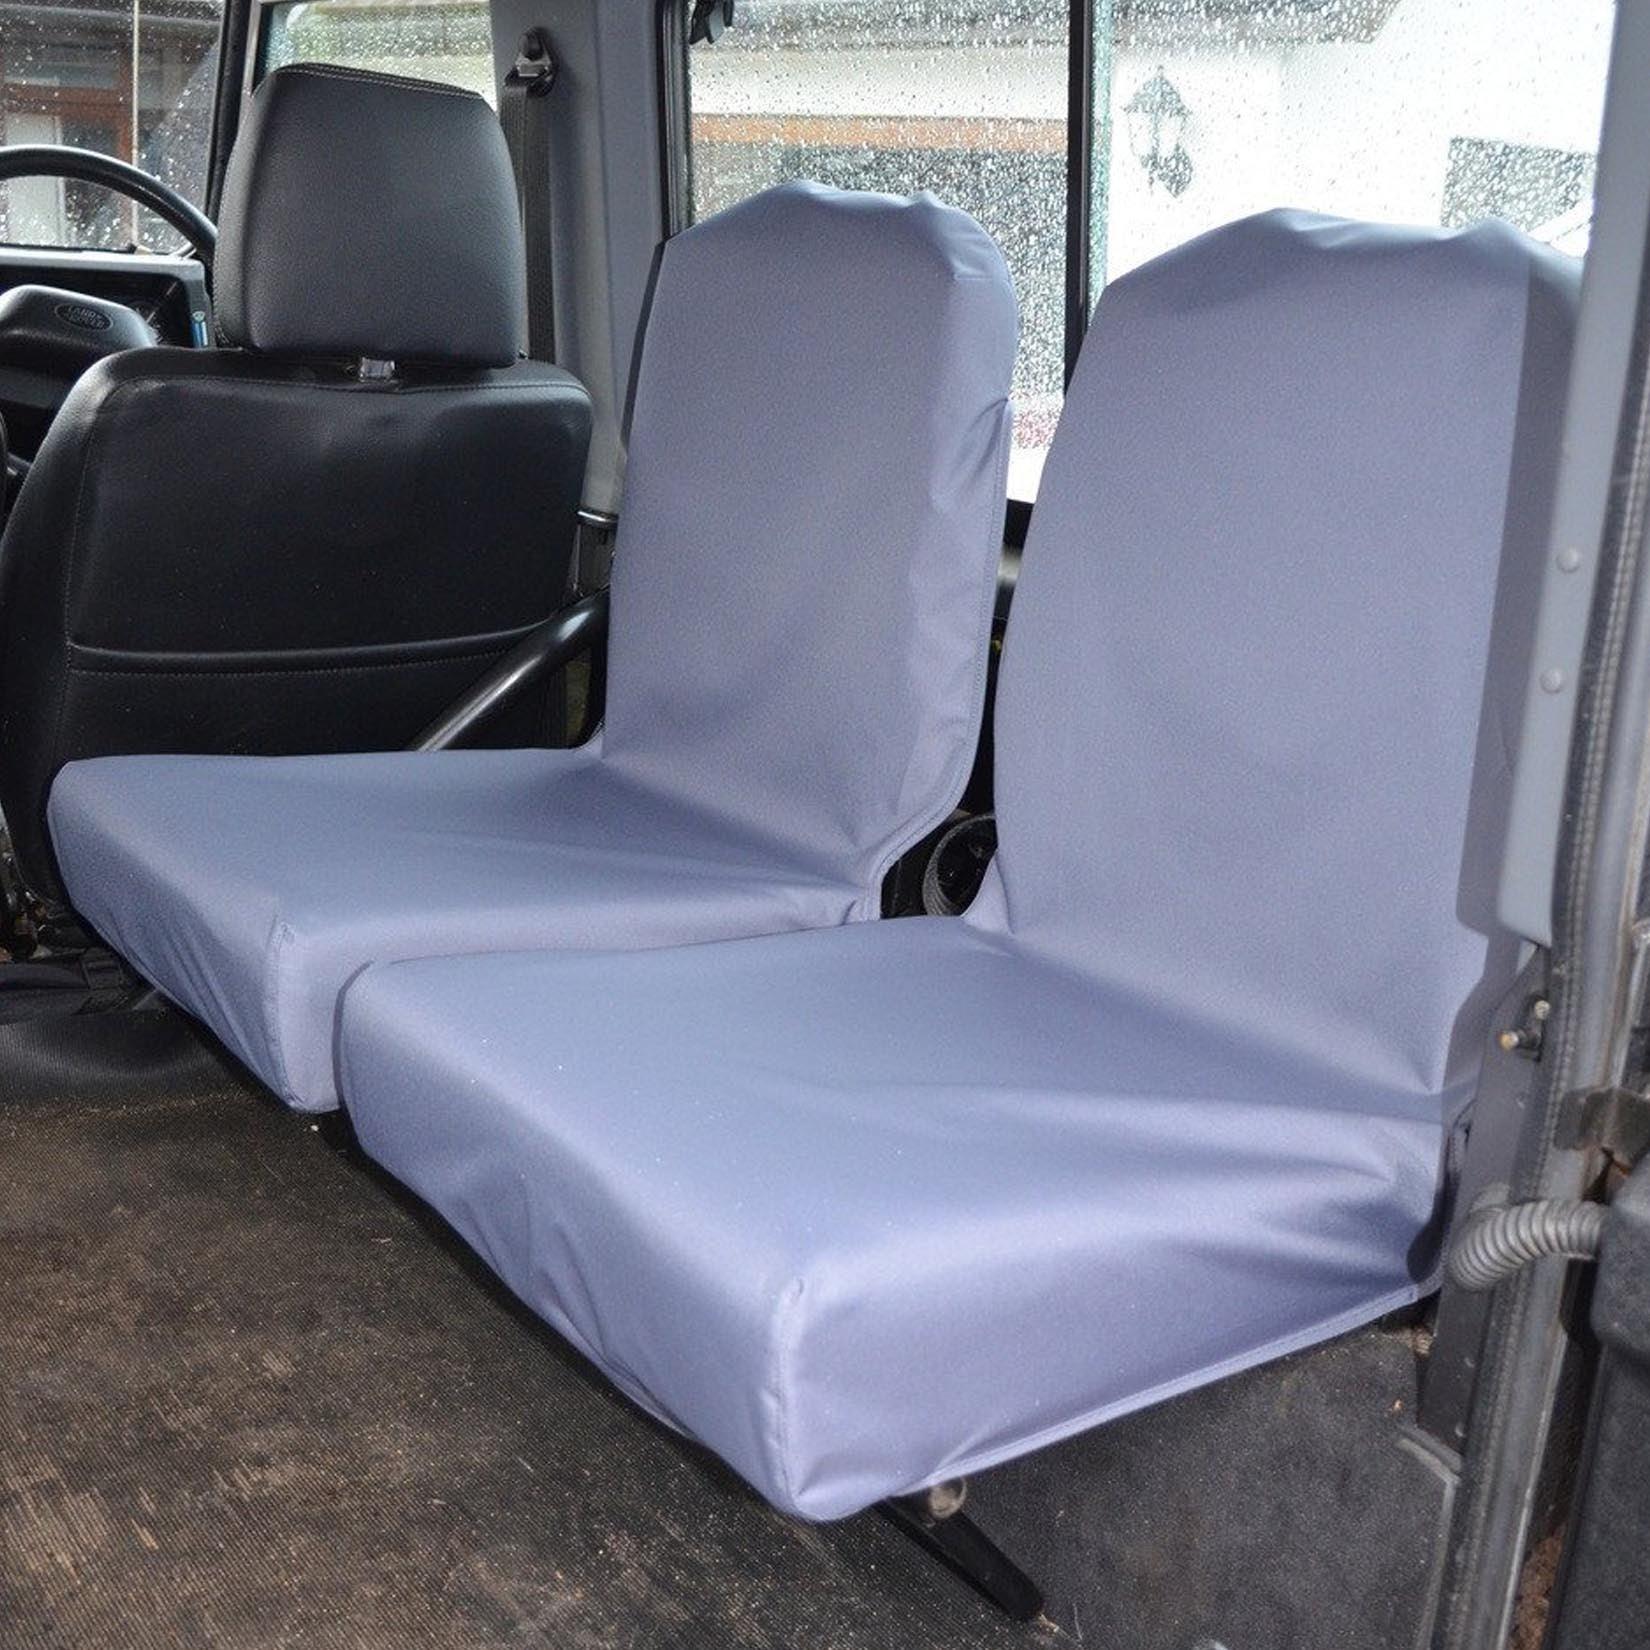 LAND ROVER DEFENDER 90 110 - 1983-2007 REAR SET OF 2 DICKY FOLDING SEAT COVERS - GREY - Storm Xccessories2